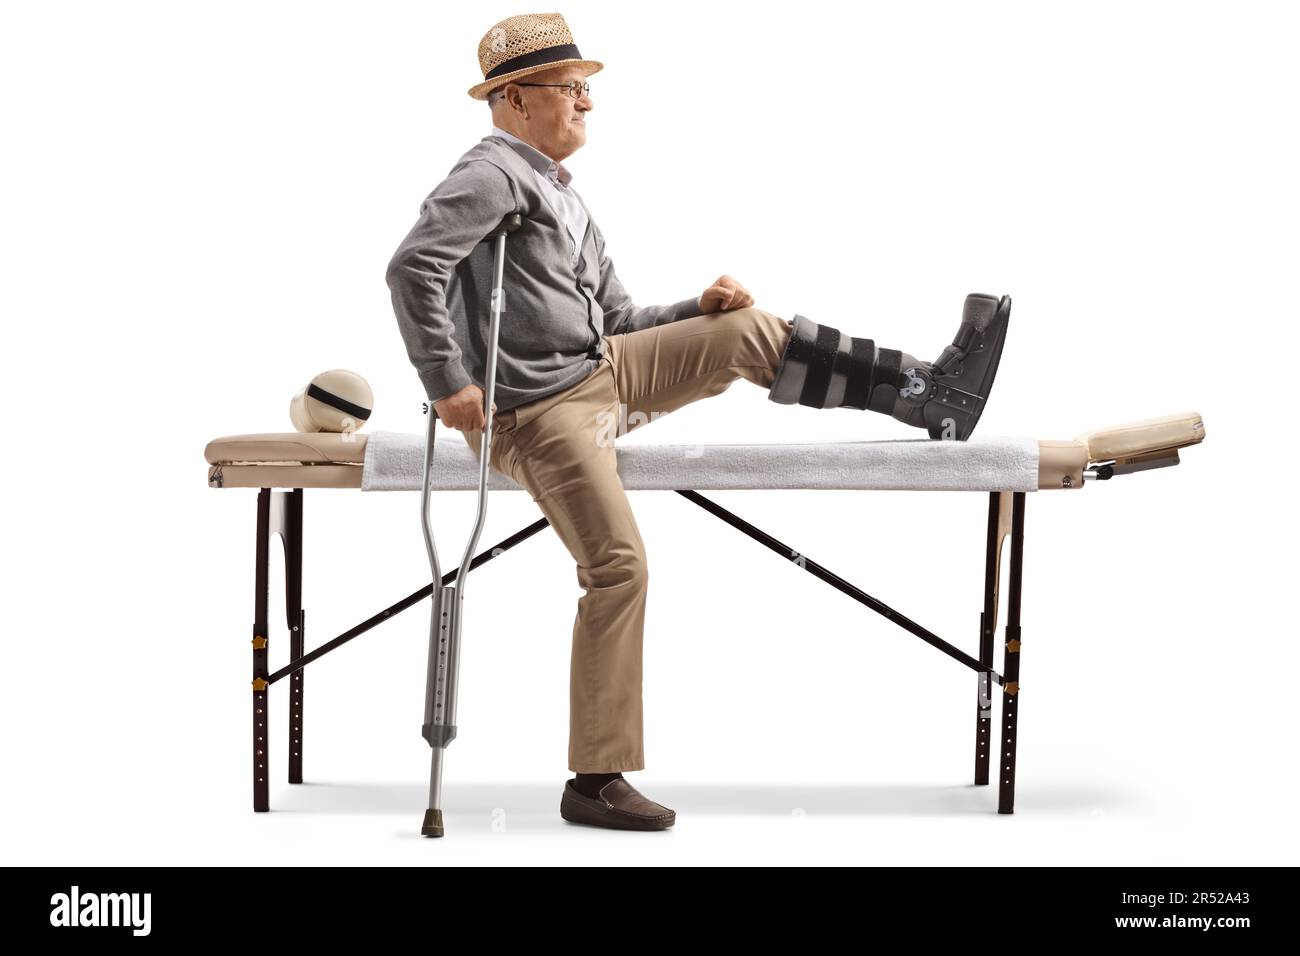 Elderly male patient sitting on a physical therapy bed with a brace on his leg isolated on white background Stock Photo